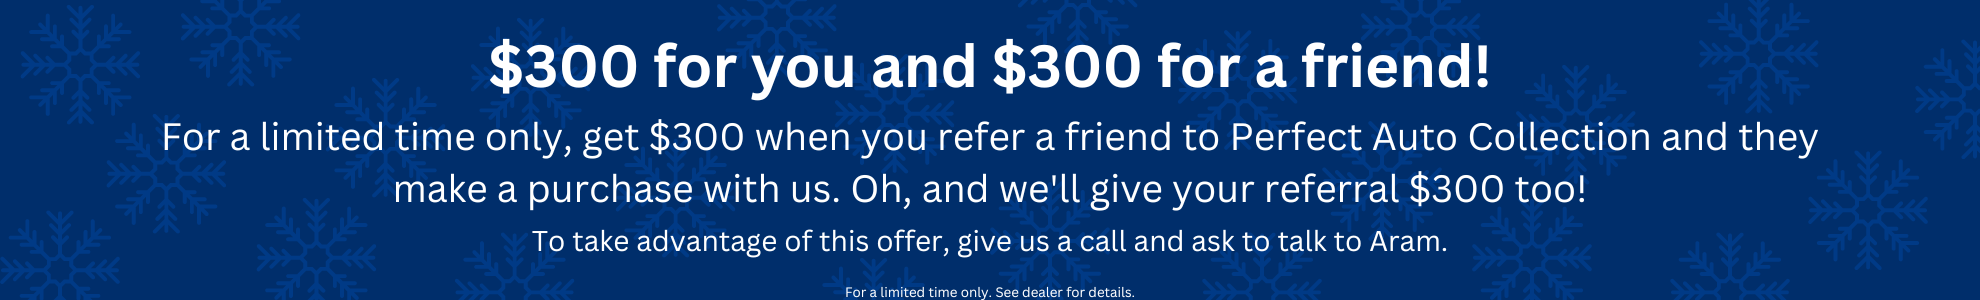 $300 for you and a friend referral